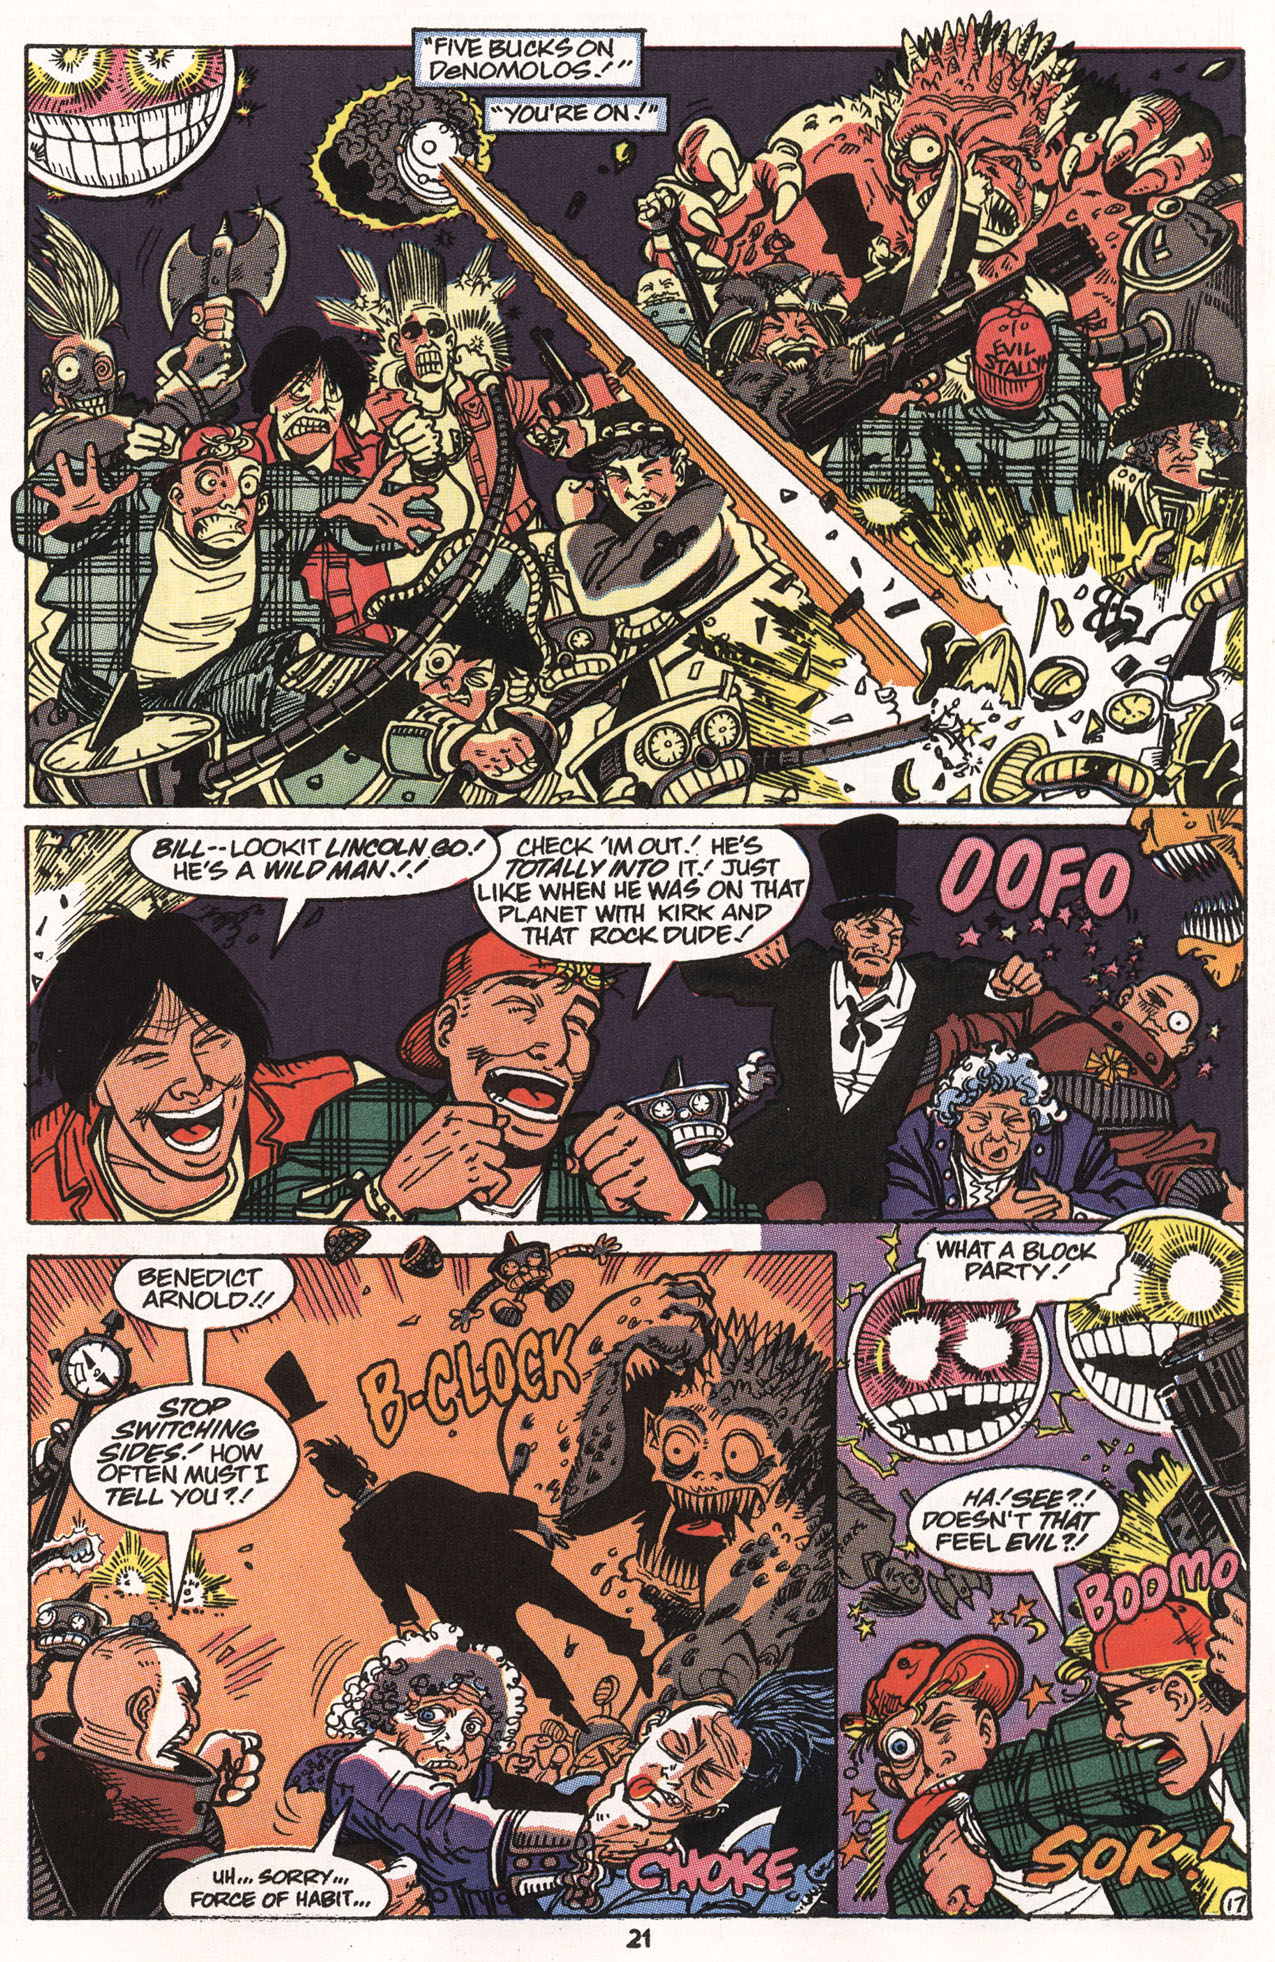 Read online Bill & Ted's Excellent Comic Book comic -  Issue #7 - 23